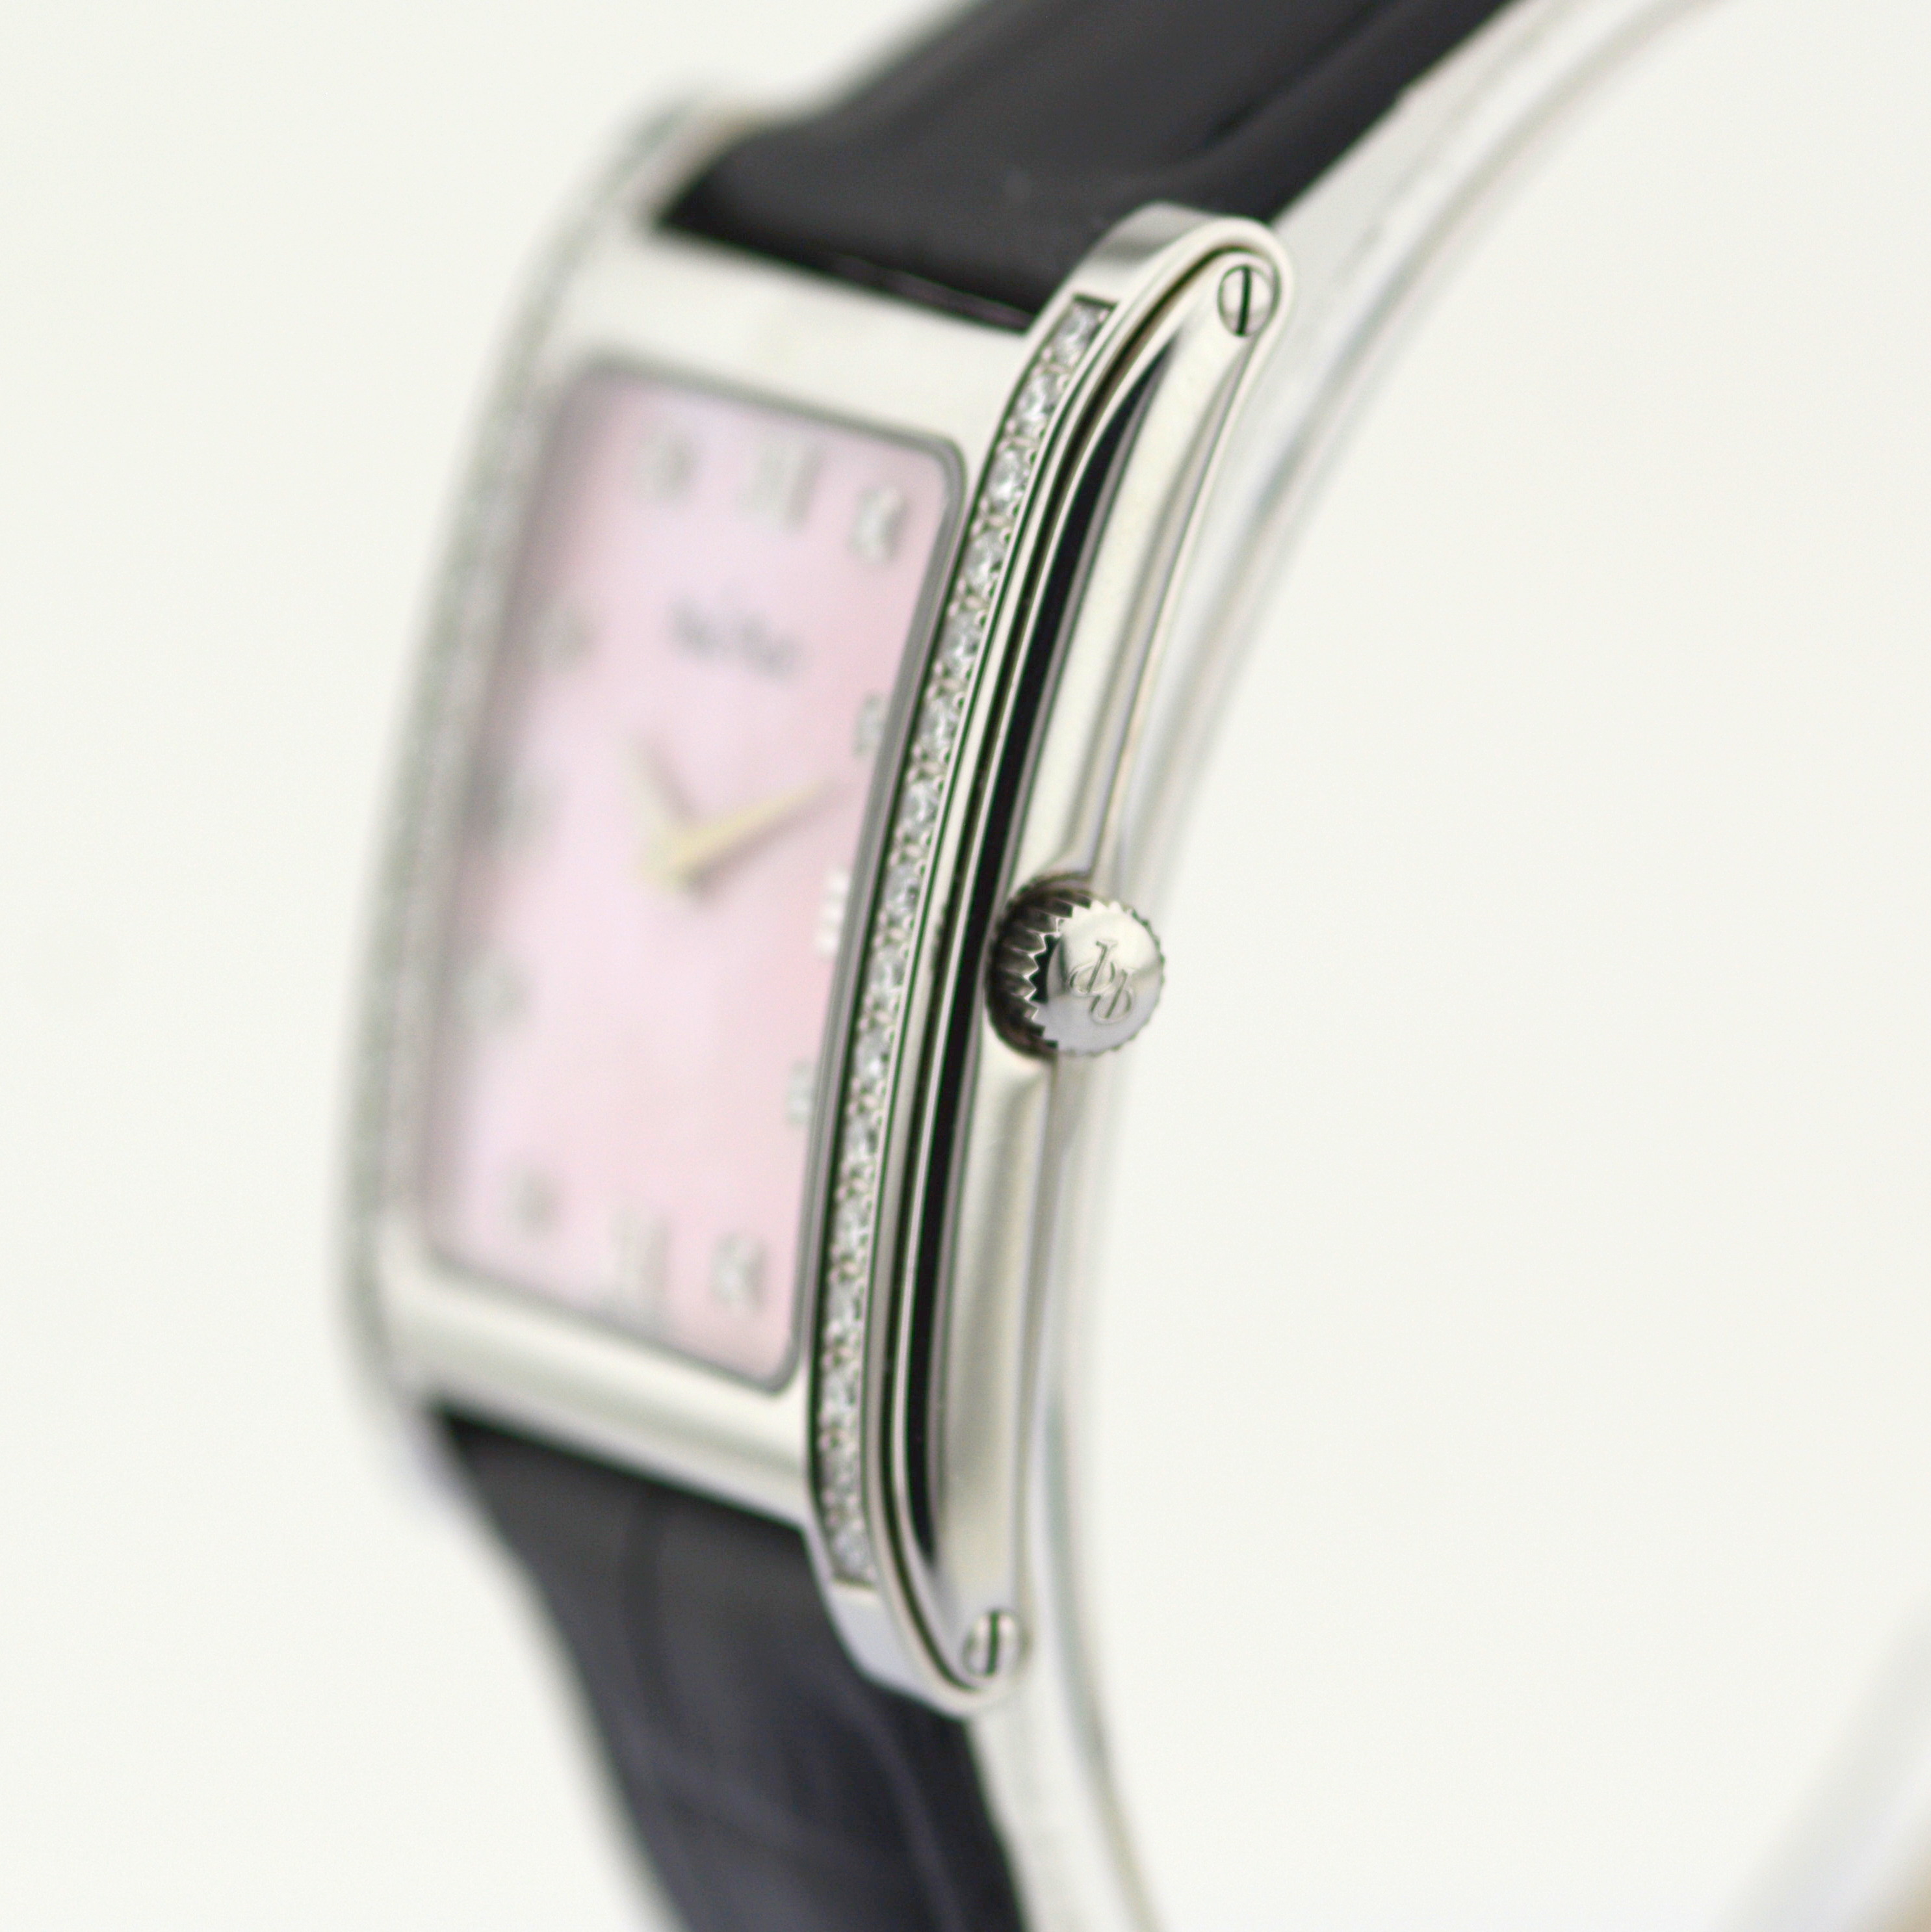 Paul Picot / 4079 Diamond Dial Diamond Case Mother of pearl - Lady's Steel Wrist Watch - Image 8 of 12